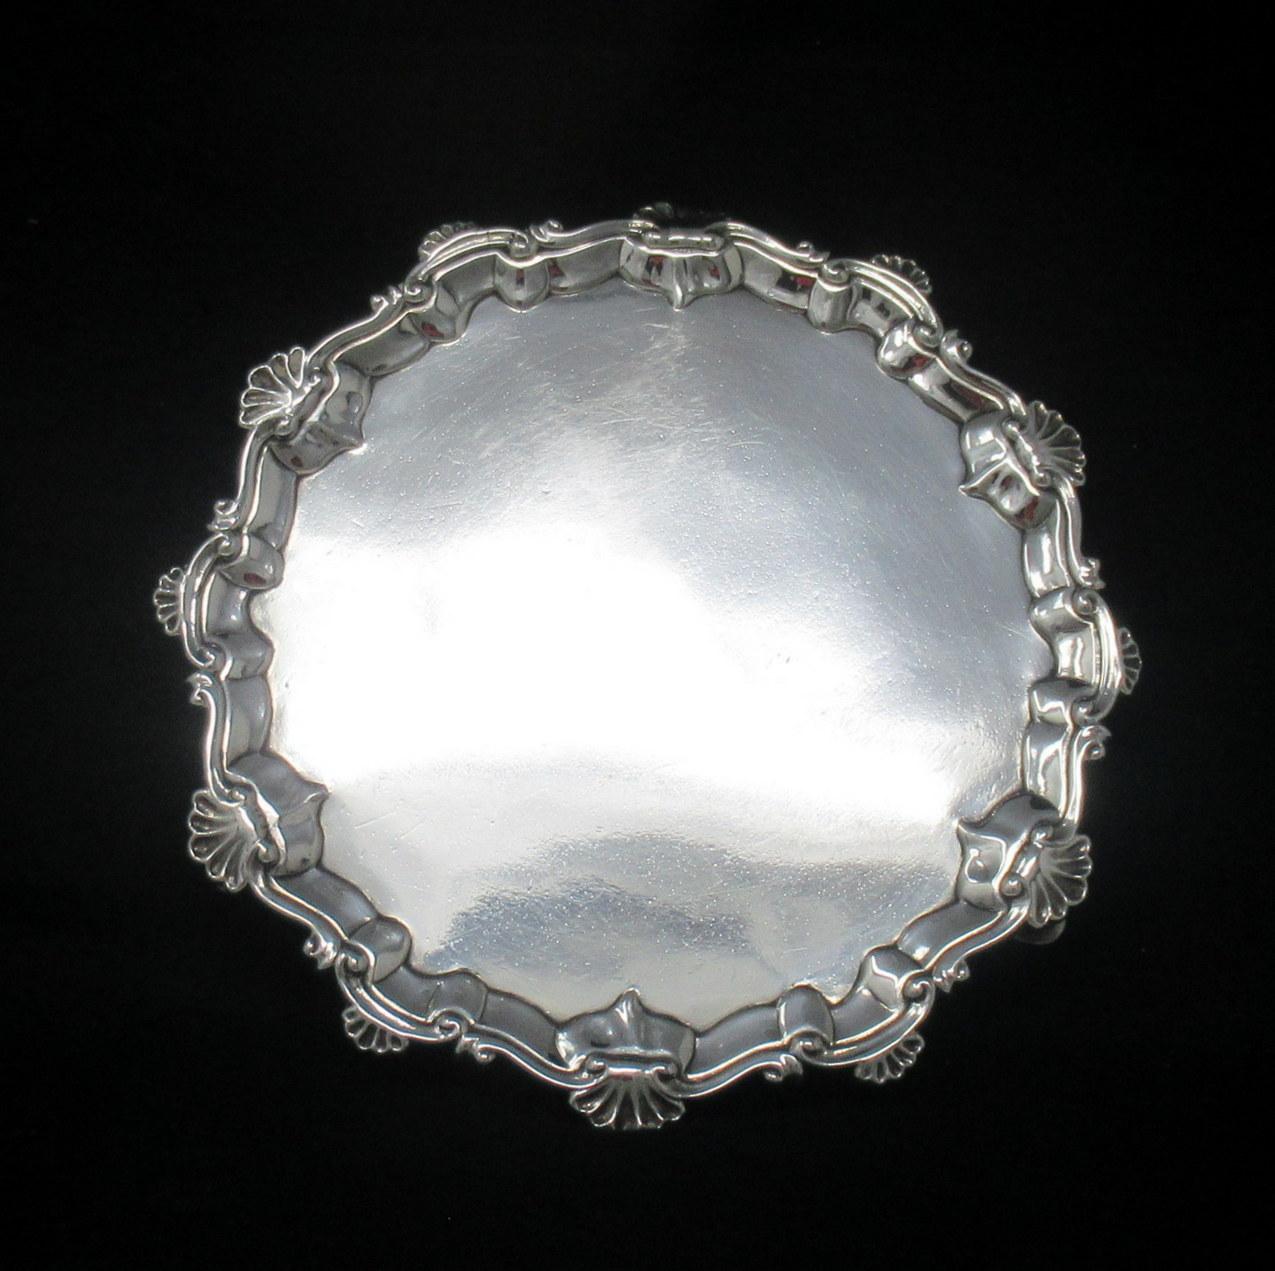 A superb Example of an early Georgian Eighteenth Century heavy gauge Sterling Silver Card Tray of outstanding quality and condition for such an early silver item. 

The shaped circular form with stylish pie crust rim detailing, edged with scroll and